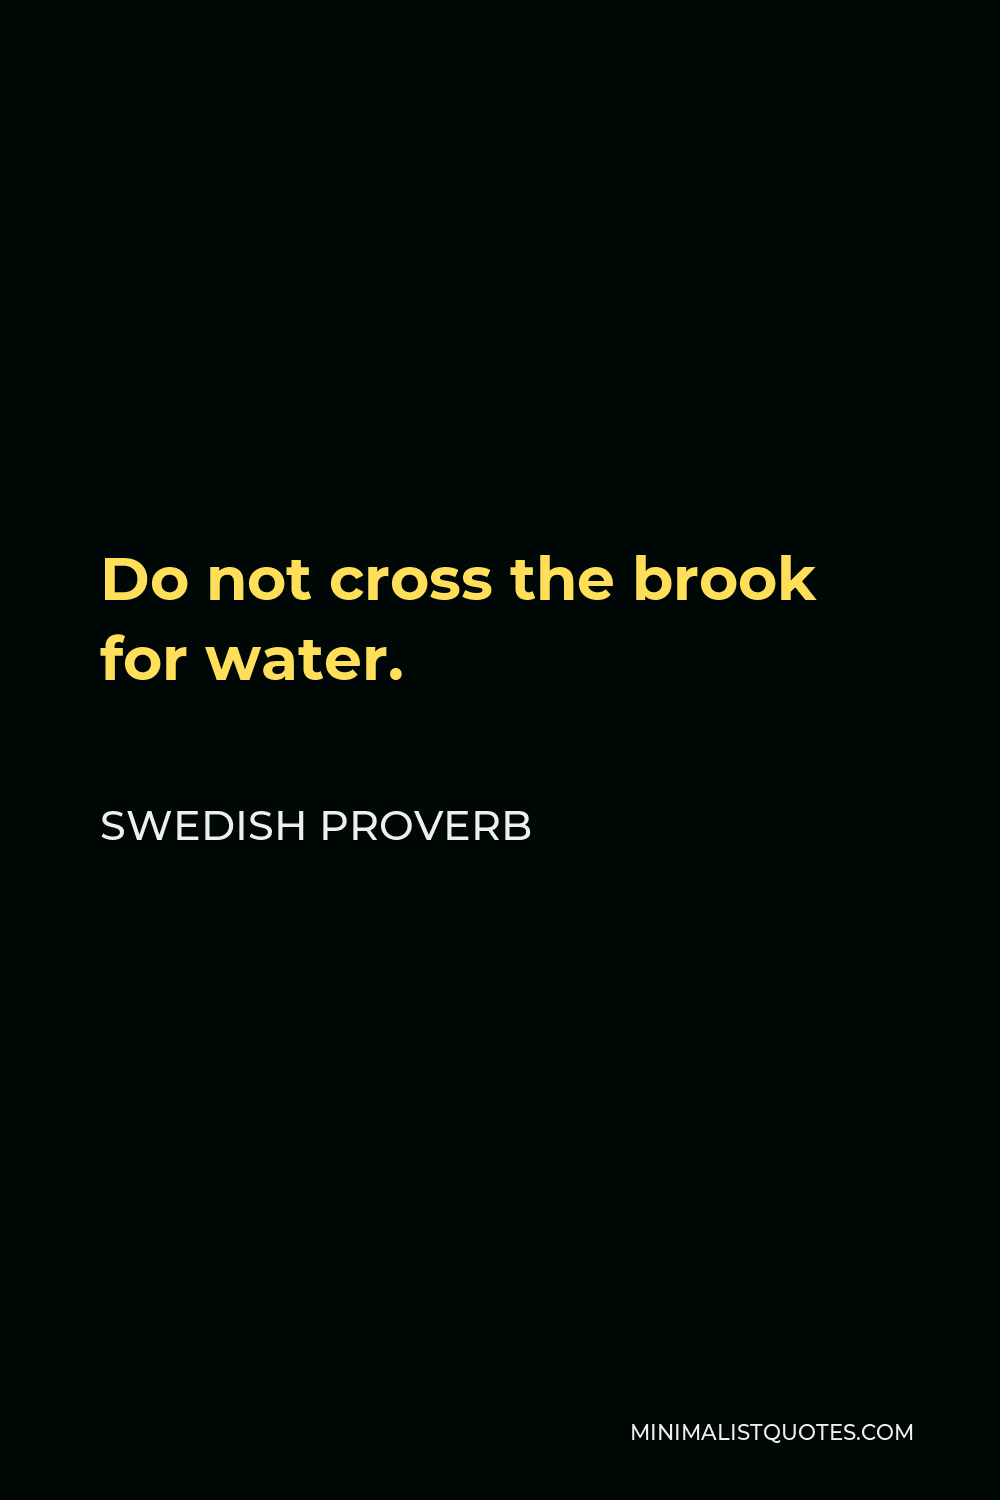 Swedish Proverb Quote - Do not cross the brook for water.